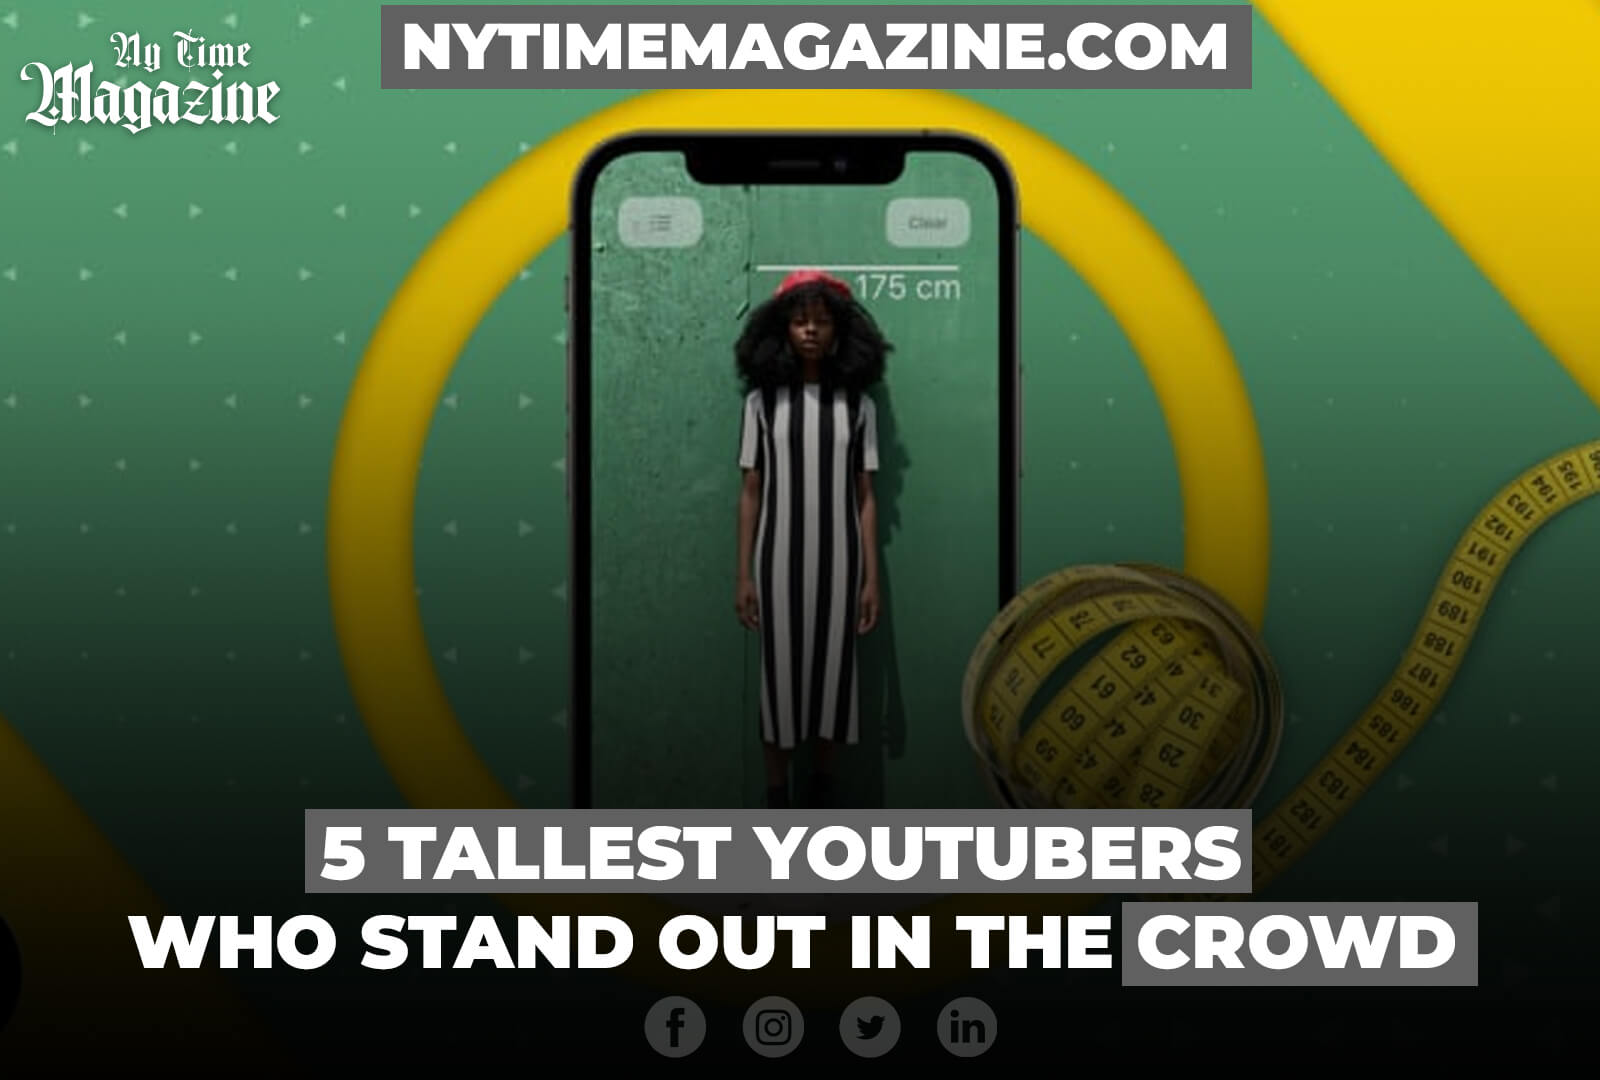 5 TALLEST YOUTUBERS WHO STAND OUT IN THE CROWD